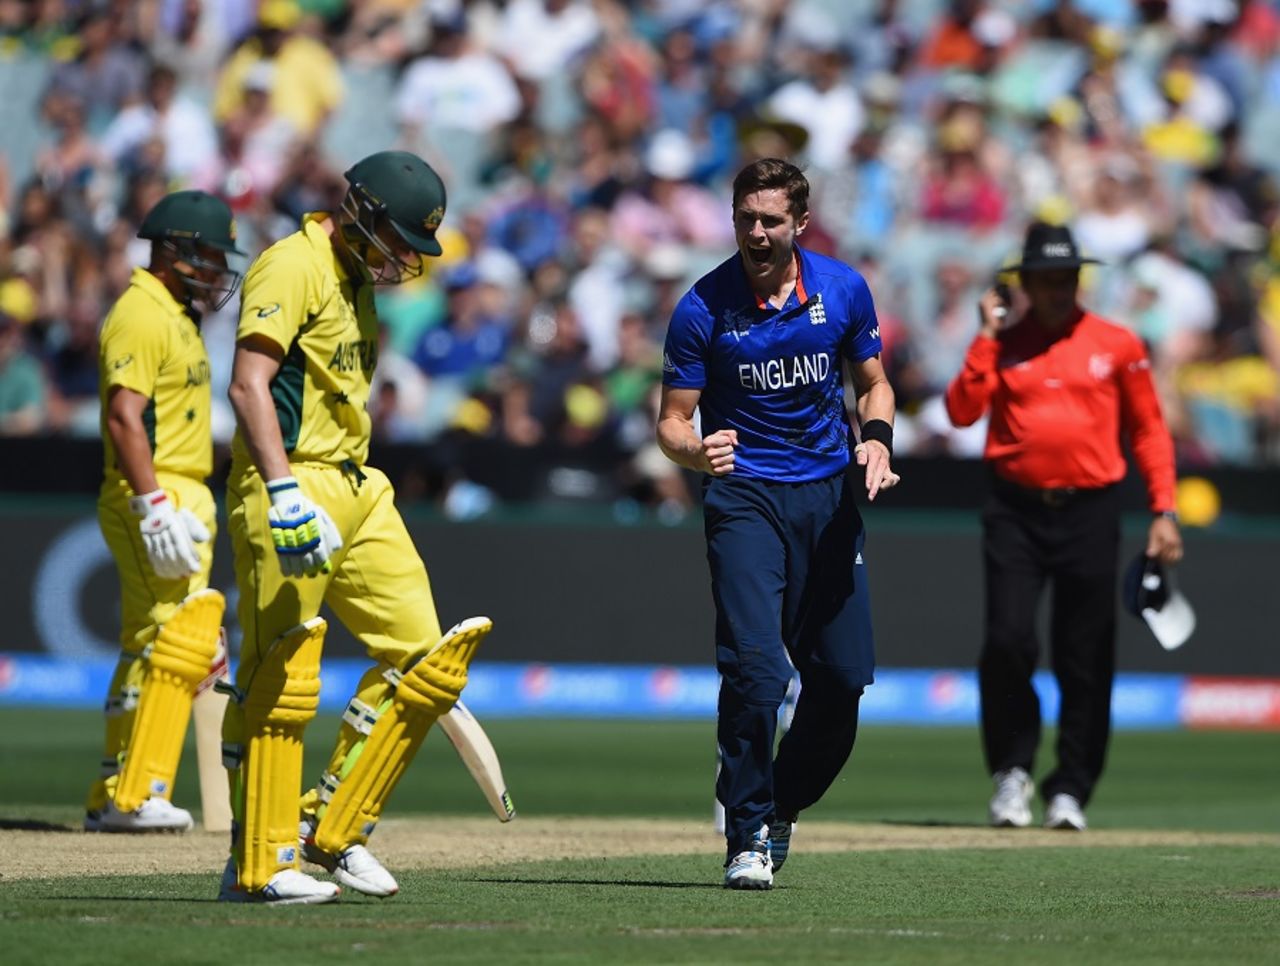 Chris Woakes is pumped up after dismissing Steven Smith, Australia v England, Group A, World Cup 2015, Melbourne, February 14, 2015